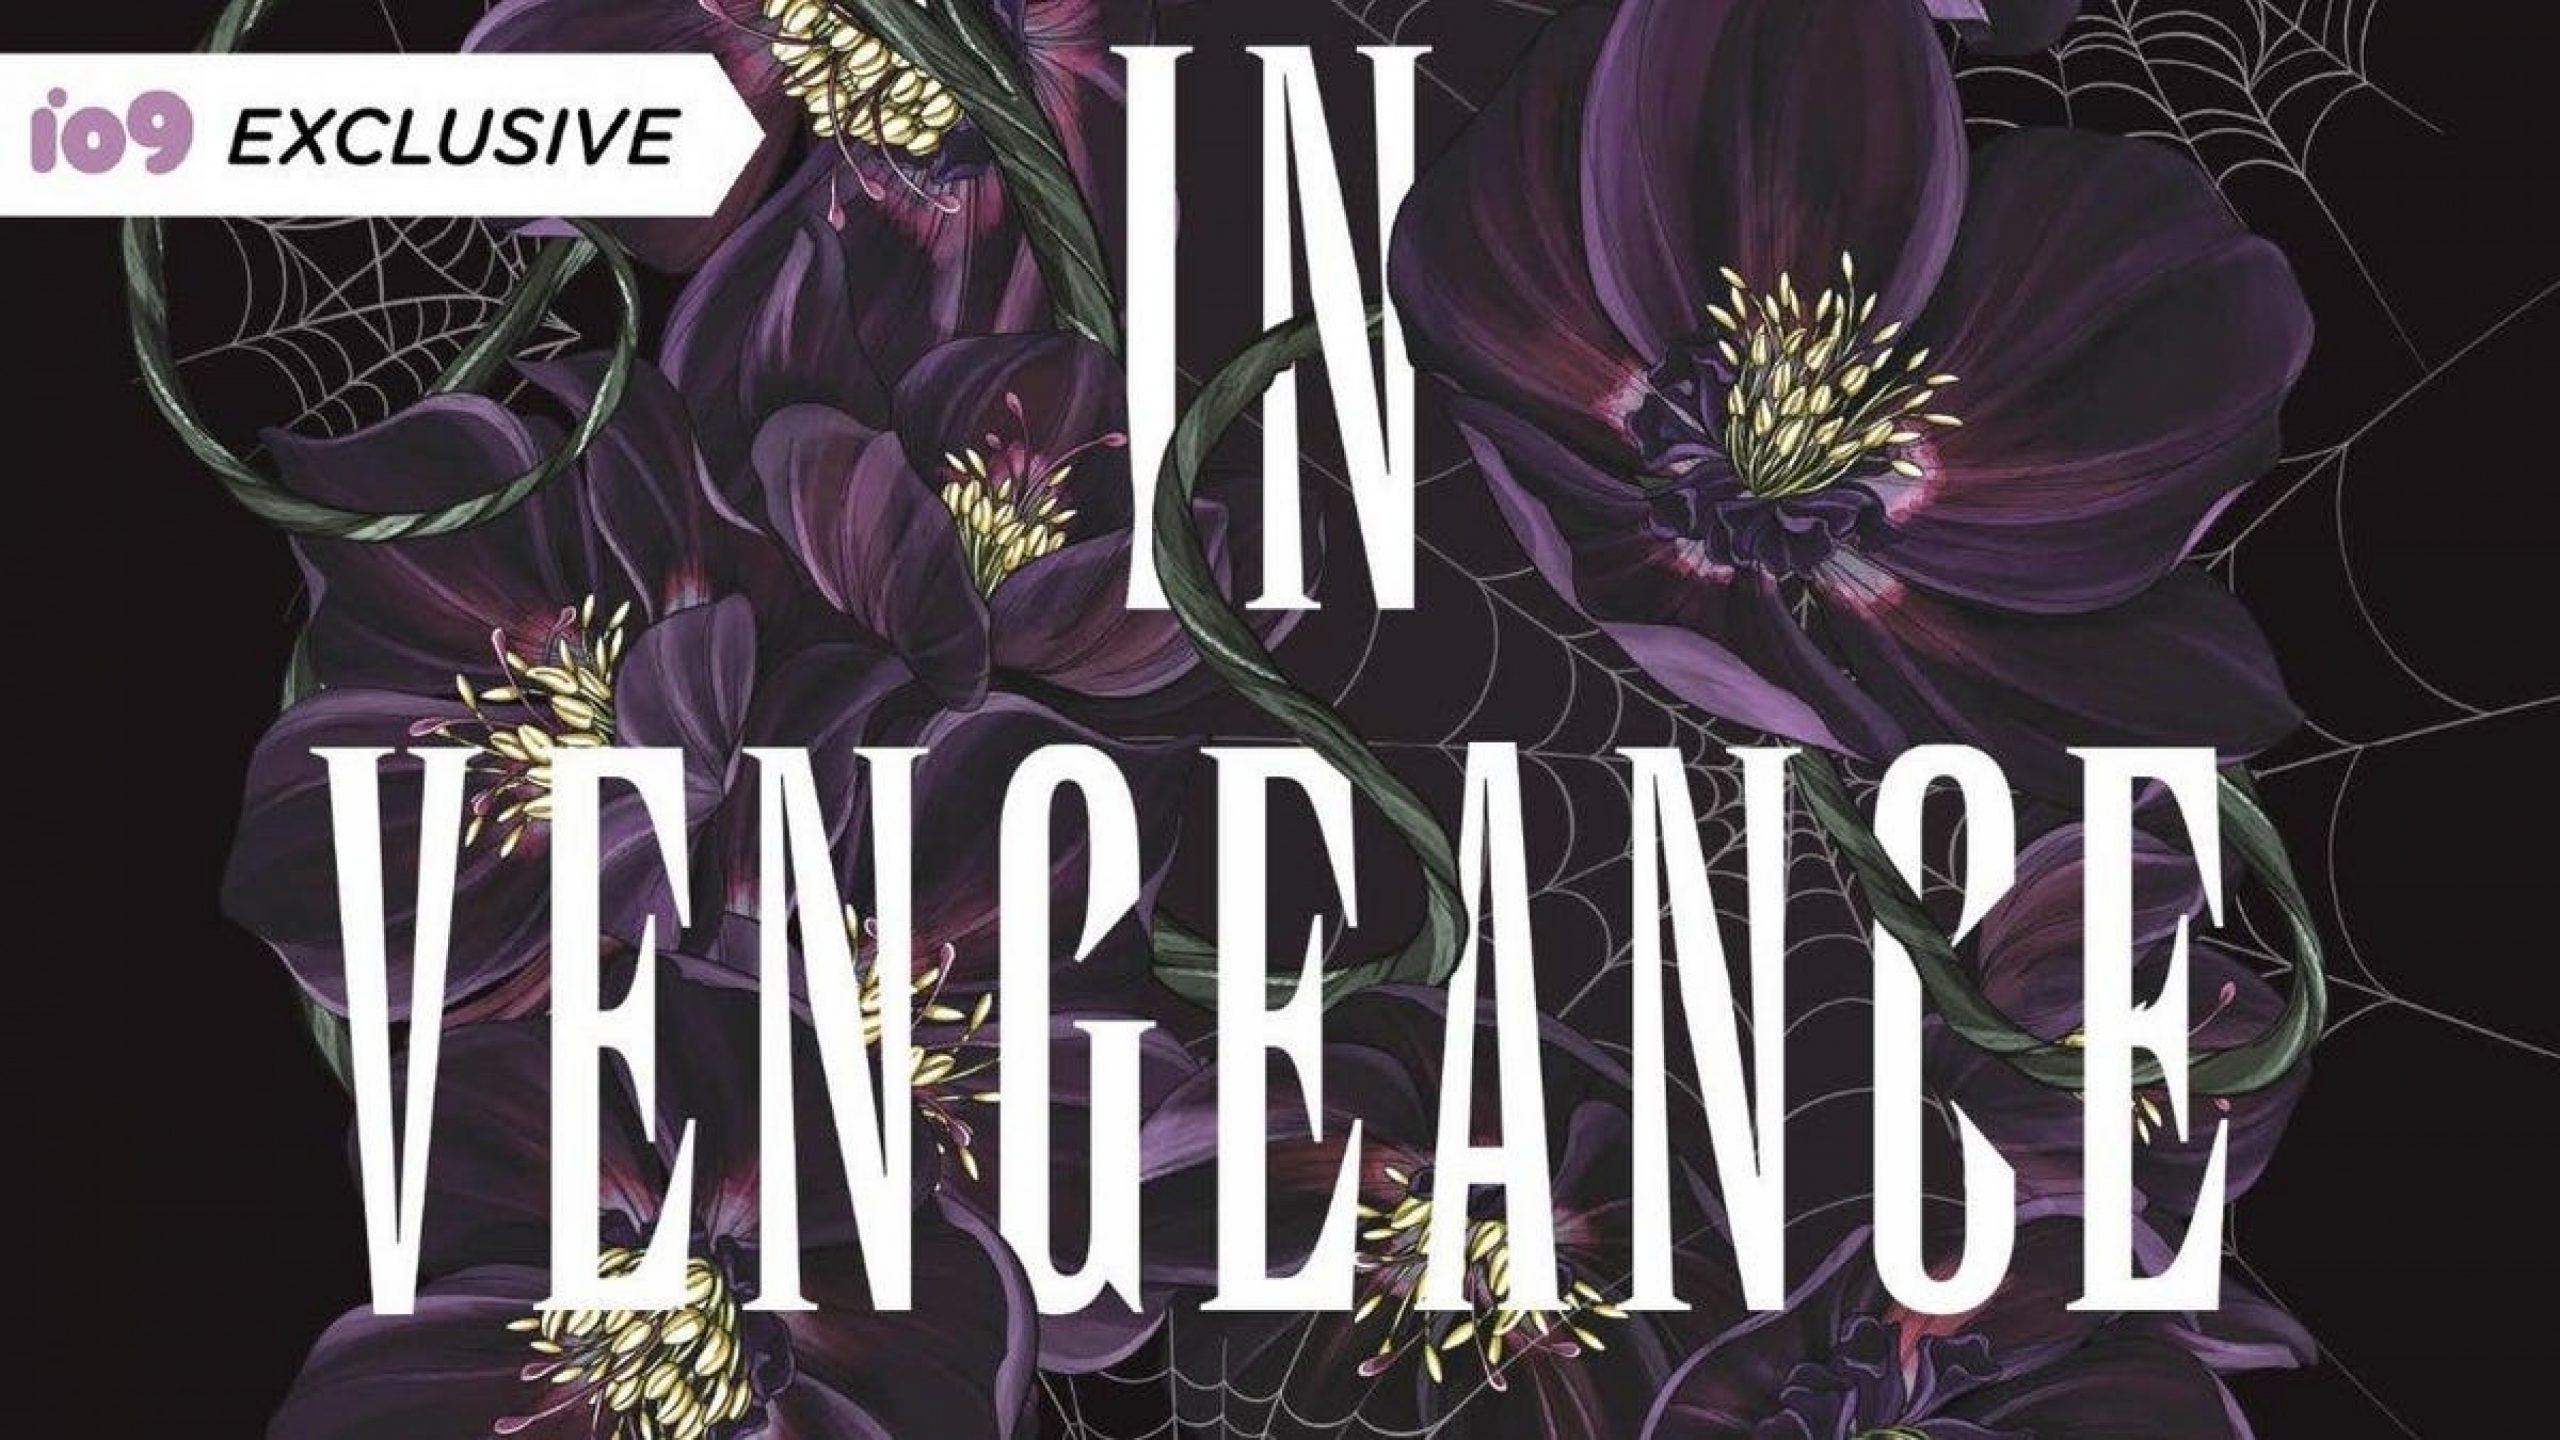 A Séance Goes Alarmingly Awry in This Spooky Excerpt From A Lesson in Vengeance